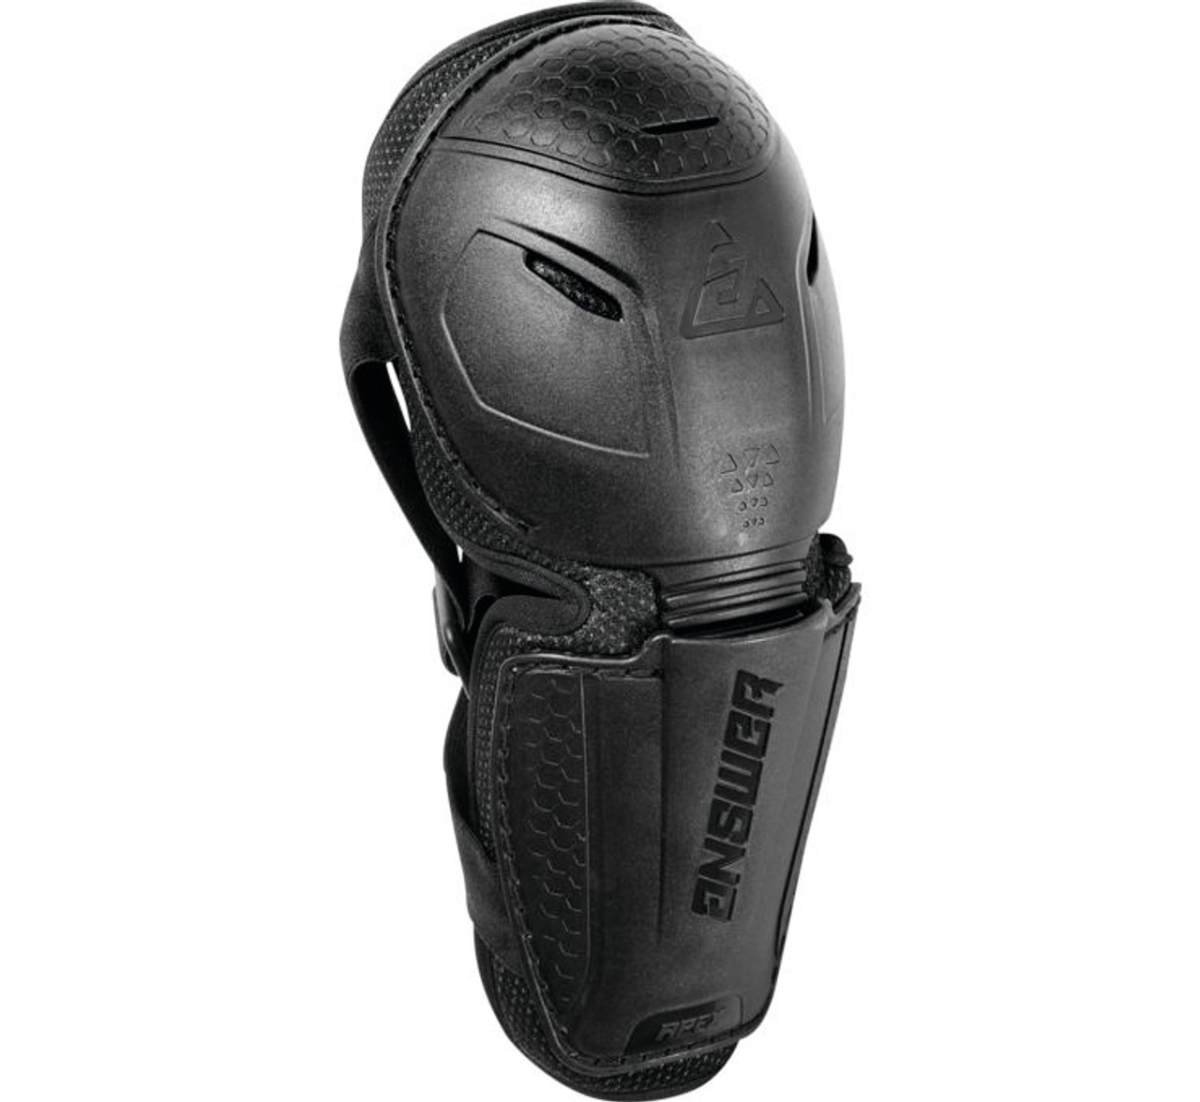 Picture of Answer 446192 Adult Apex Elbow Guard - One Size